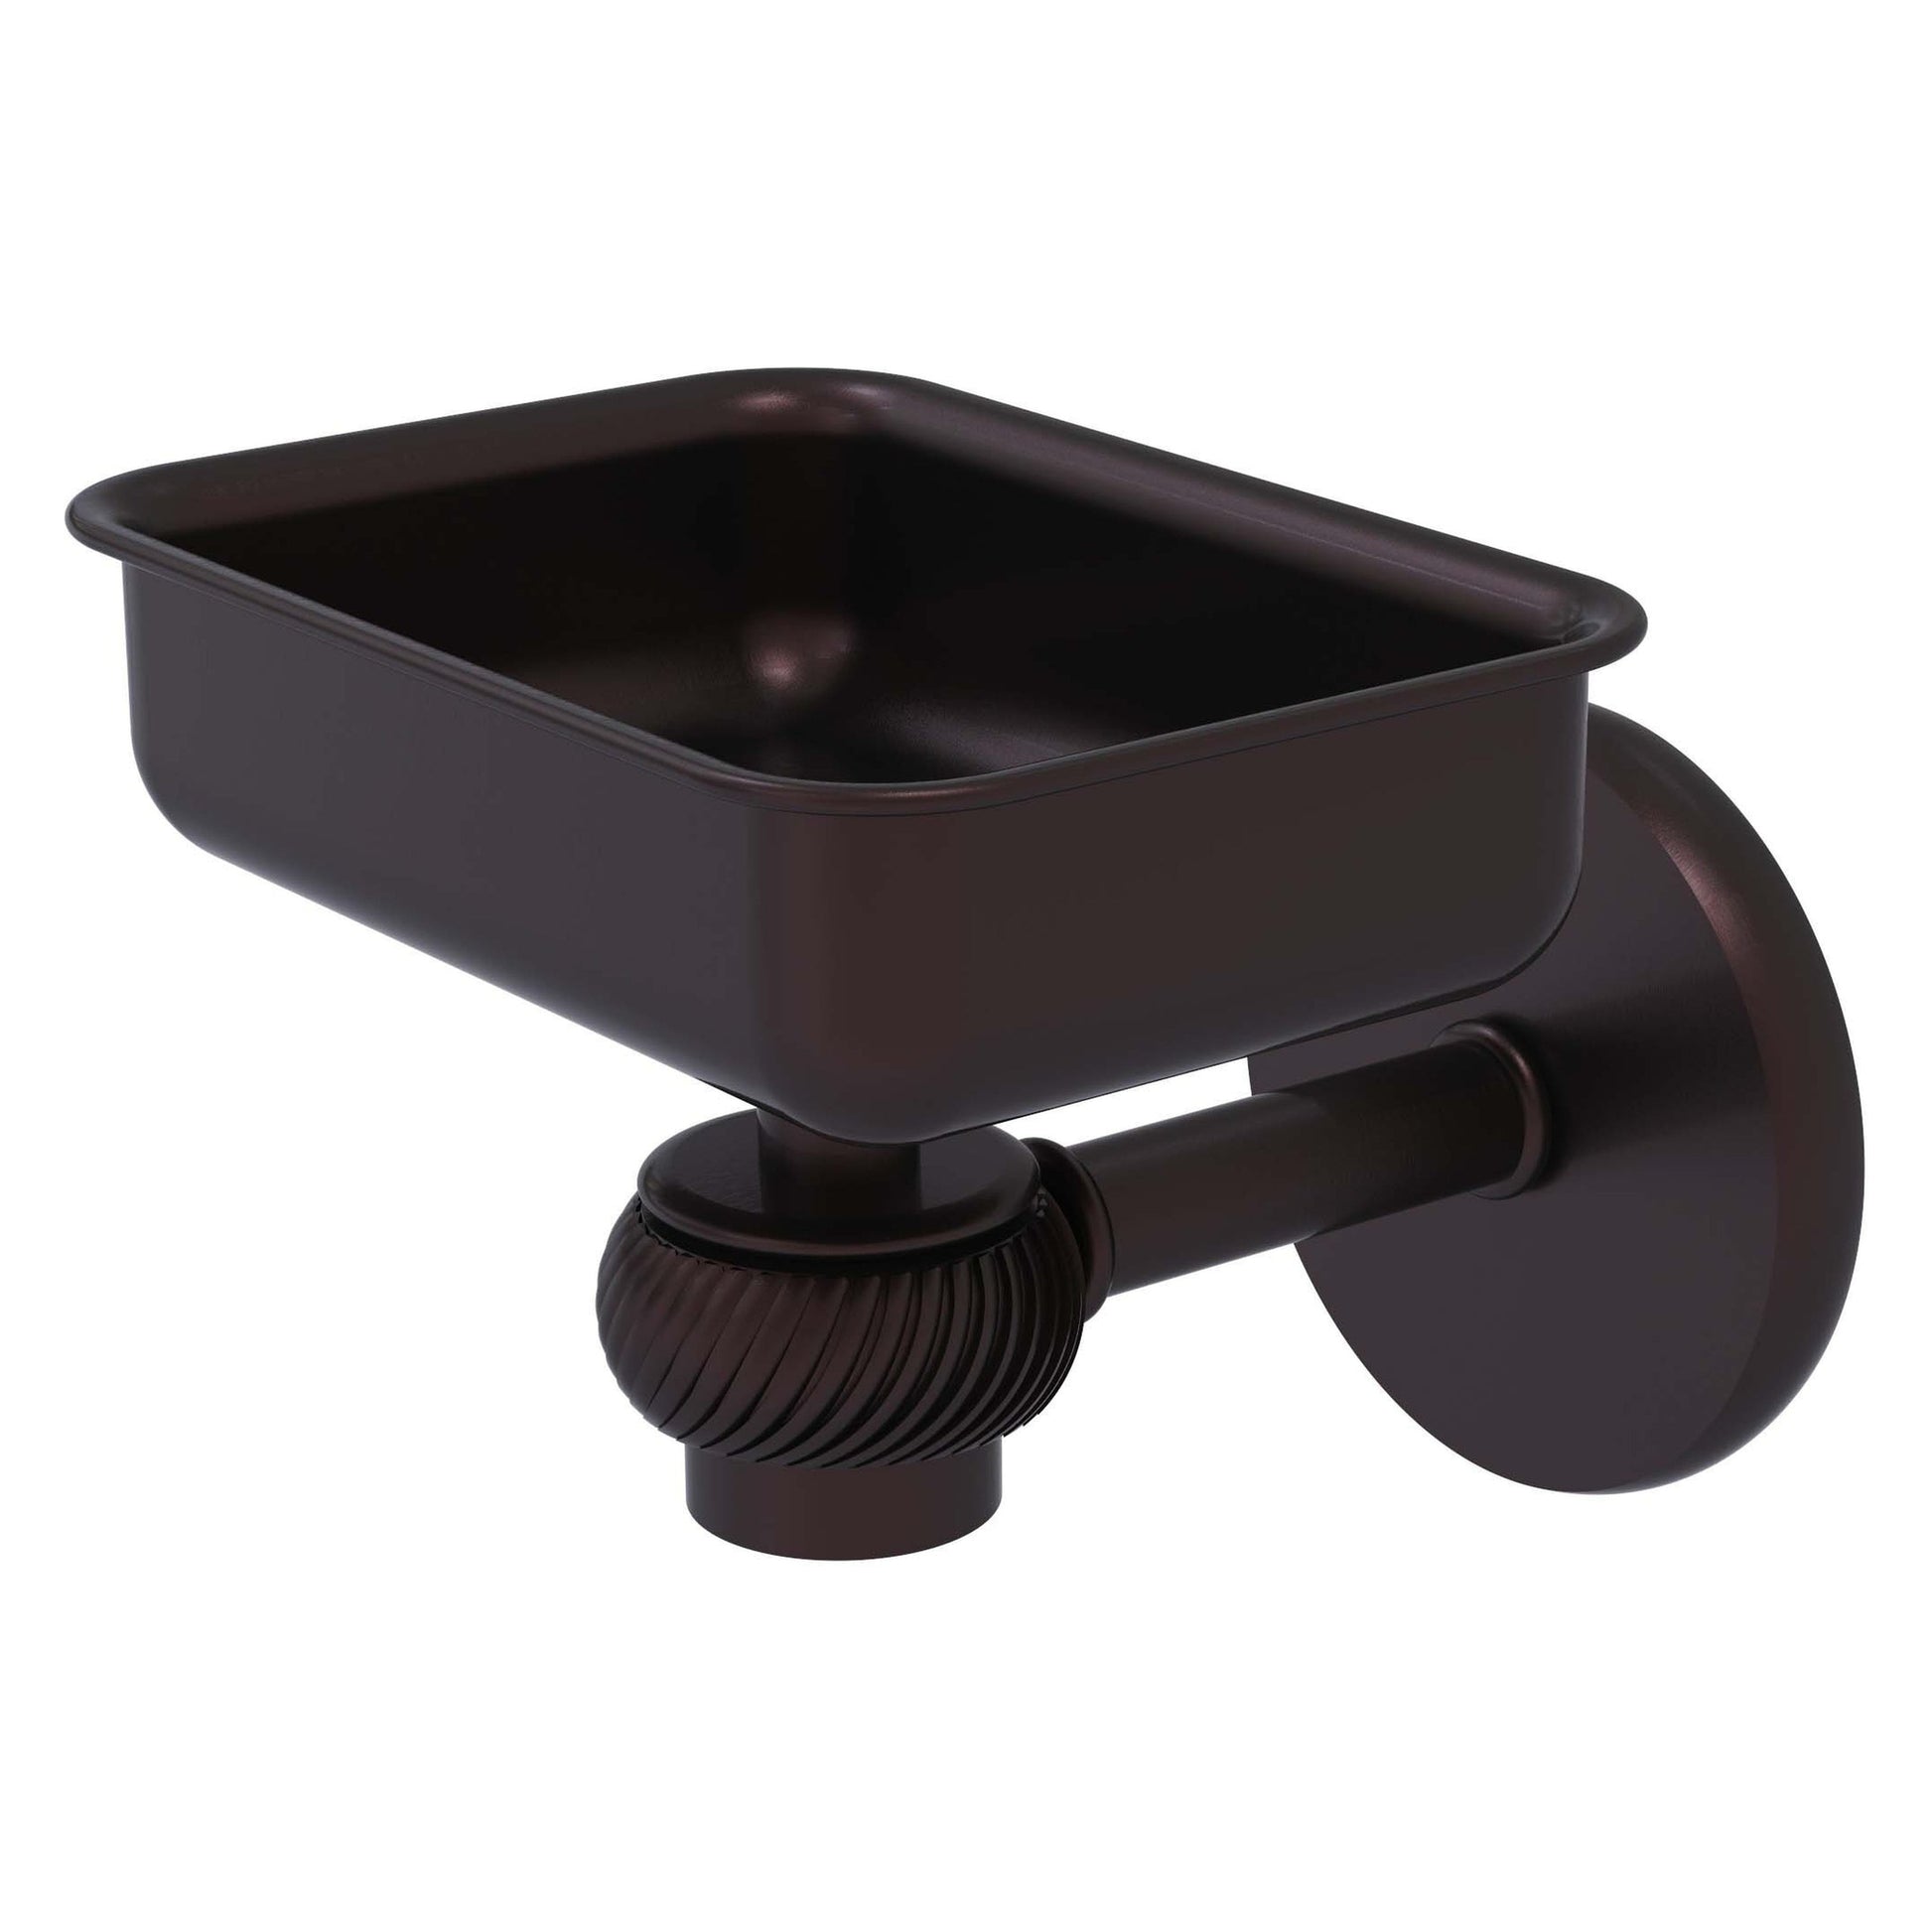 Allied Brass Satellite Orbit One 4.5" x 3.5" Antique Bronze Solid Brass Wall-Mounted Soap Dish With Twisted Accents